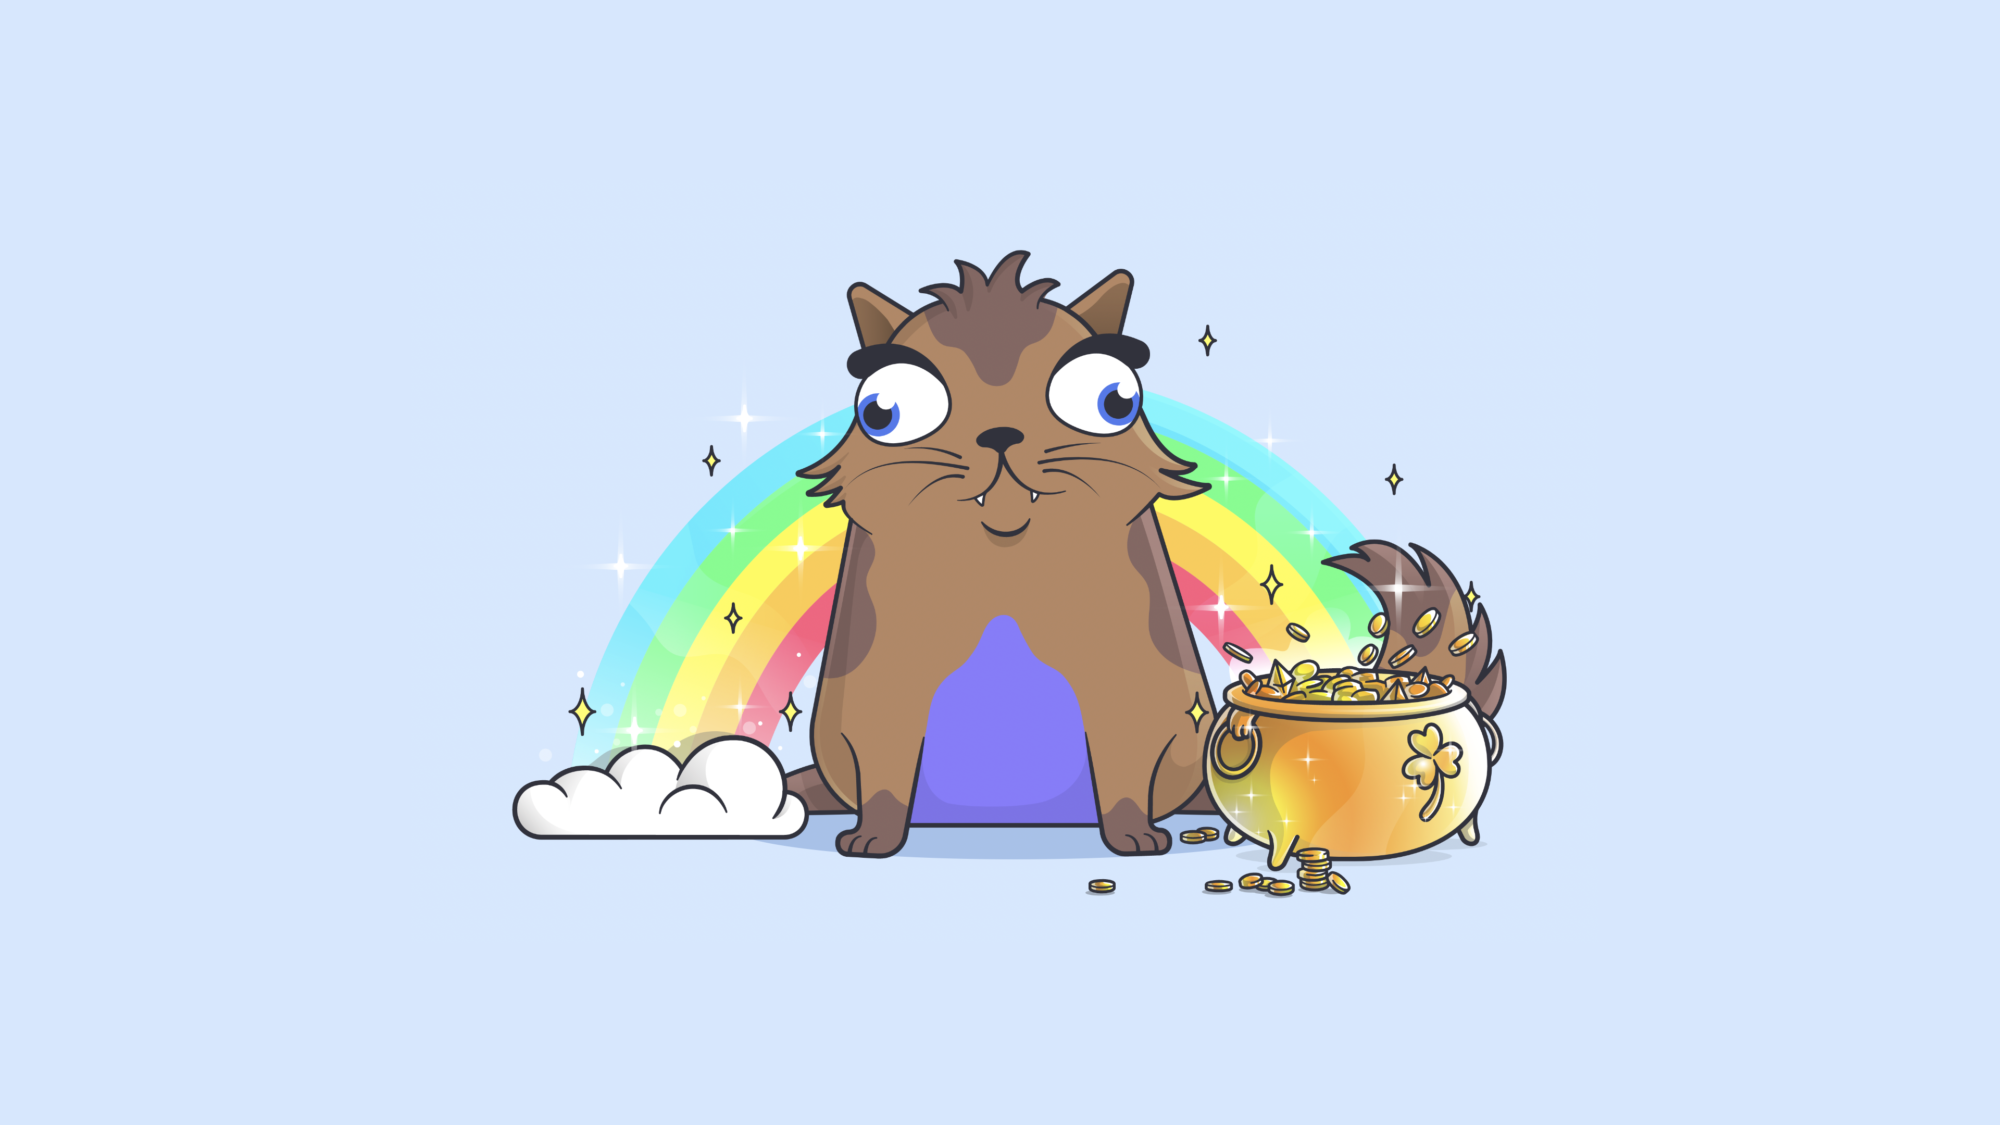 An illustration of a cat (a cryptokitty) which has brown fur, cross-eyes, and is sat infront of a rainbow.